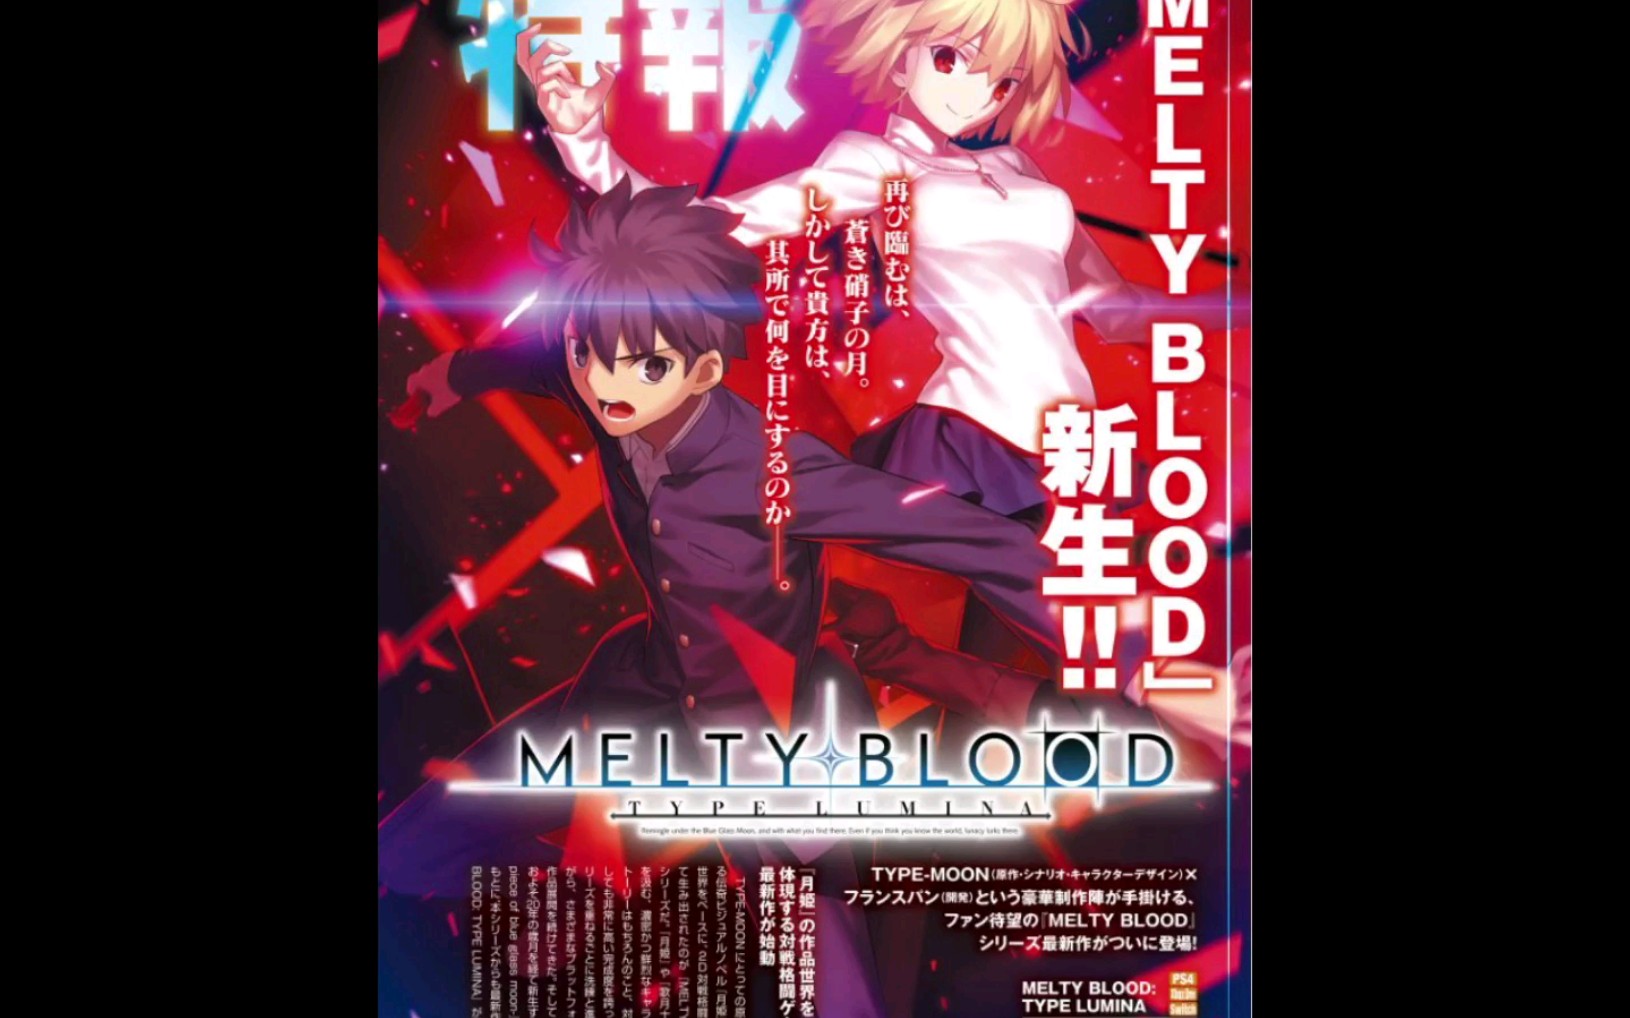 60%OFF!】 だいすけ店MELTY BLOOD: TYPE LUMINA MELTY BLOOD ARCHIVES BLOOD読本 M 